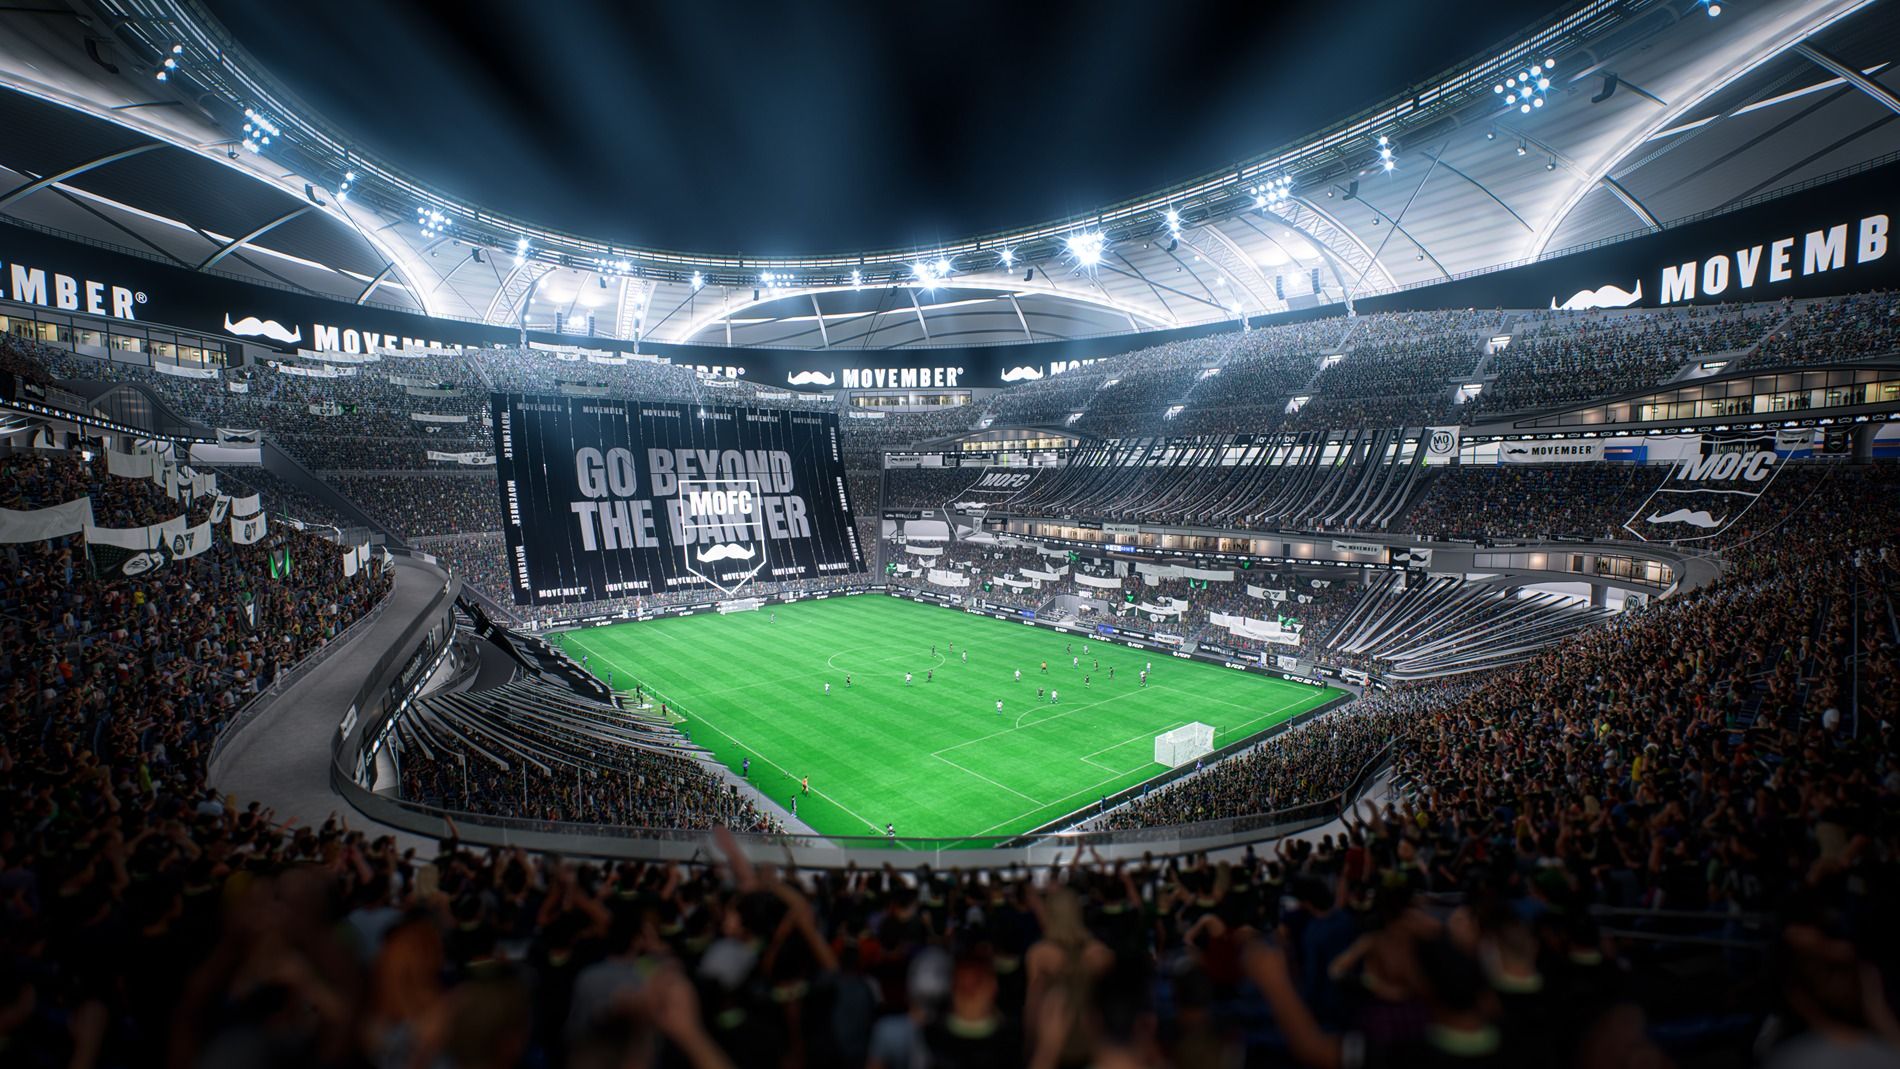 Digital image of a football pitch with Movember branding